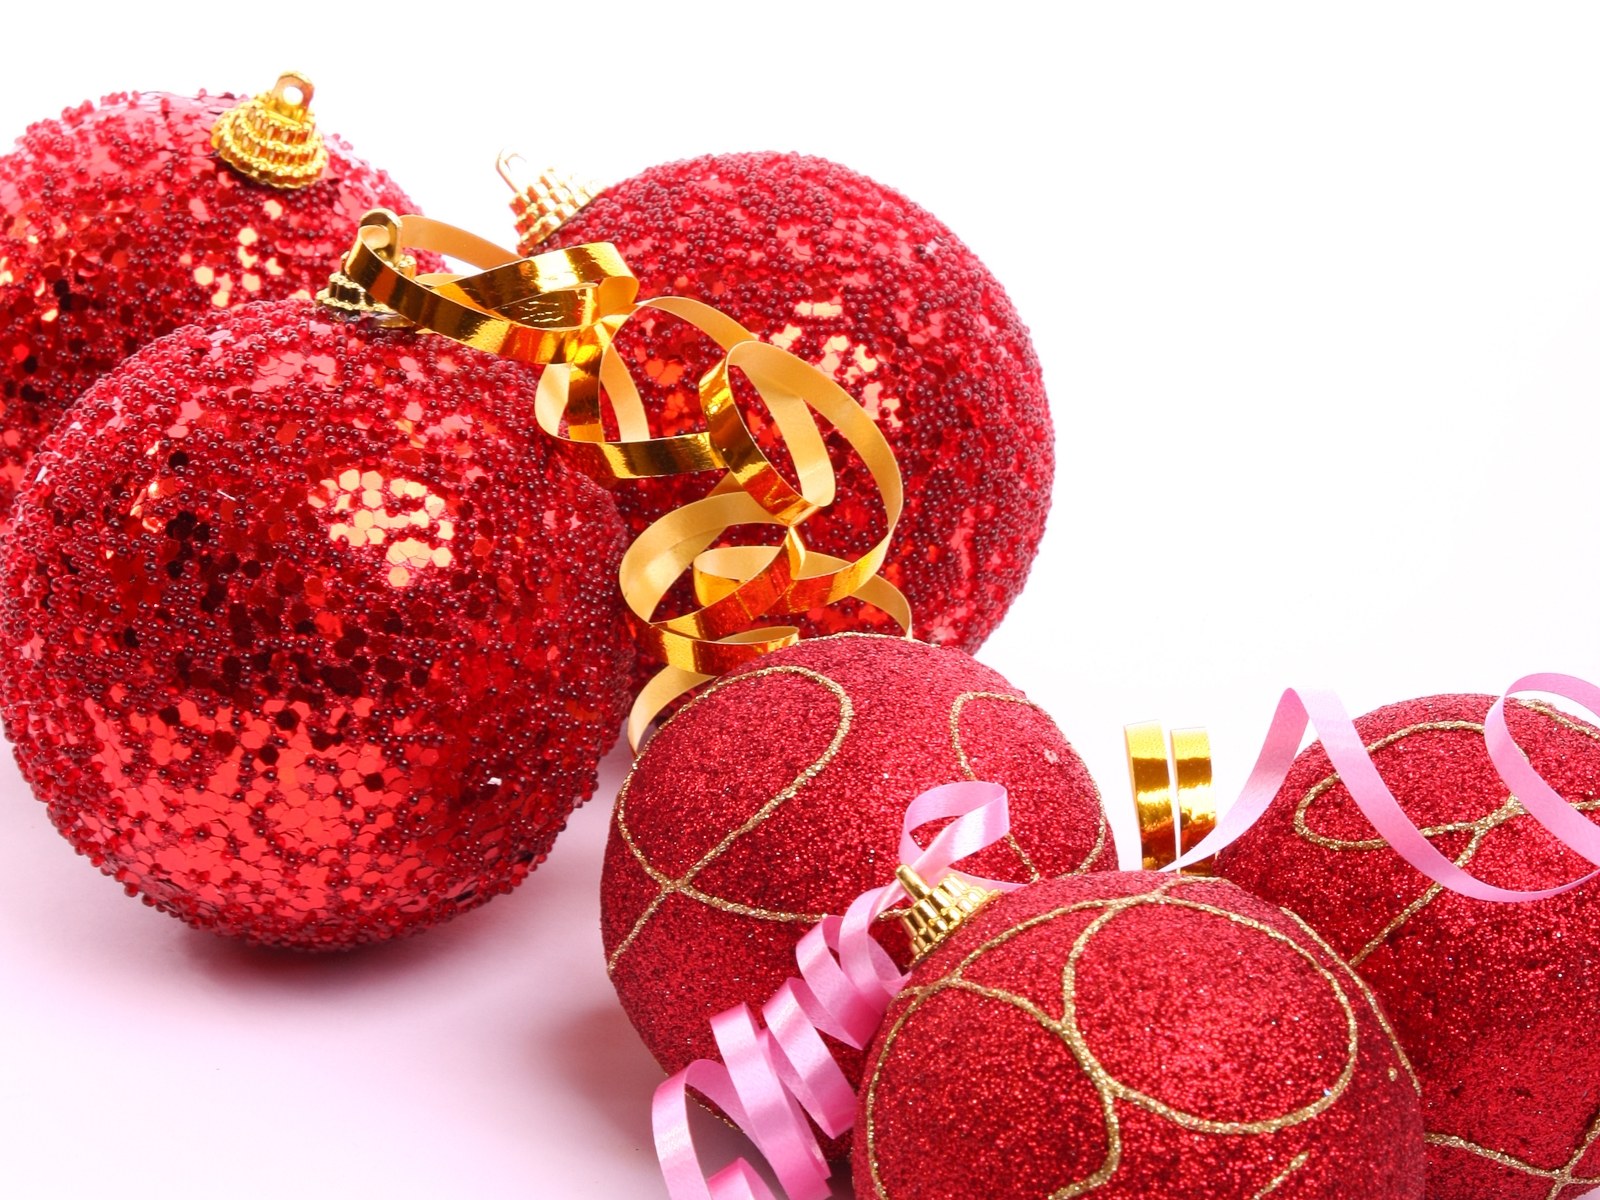 Balls Christmas Image Tree Adorned With Globes Wallpaper